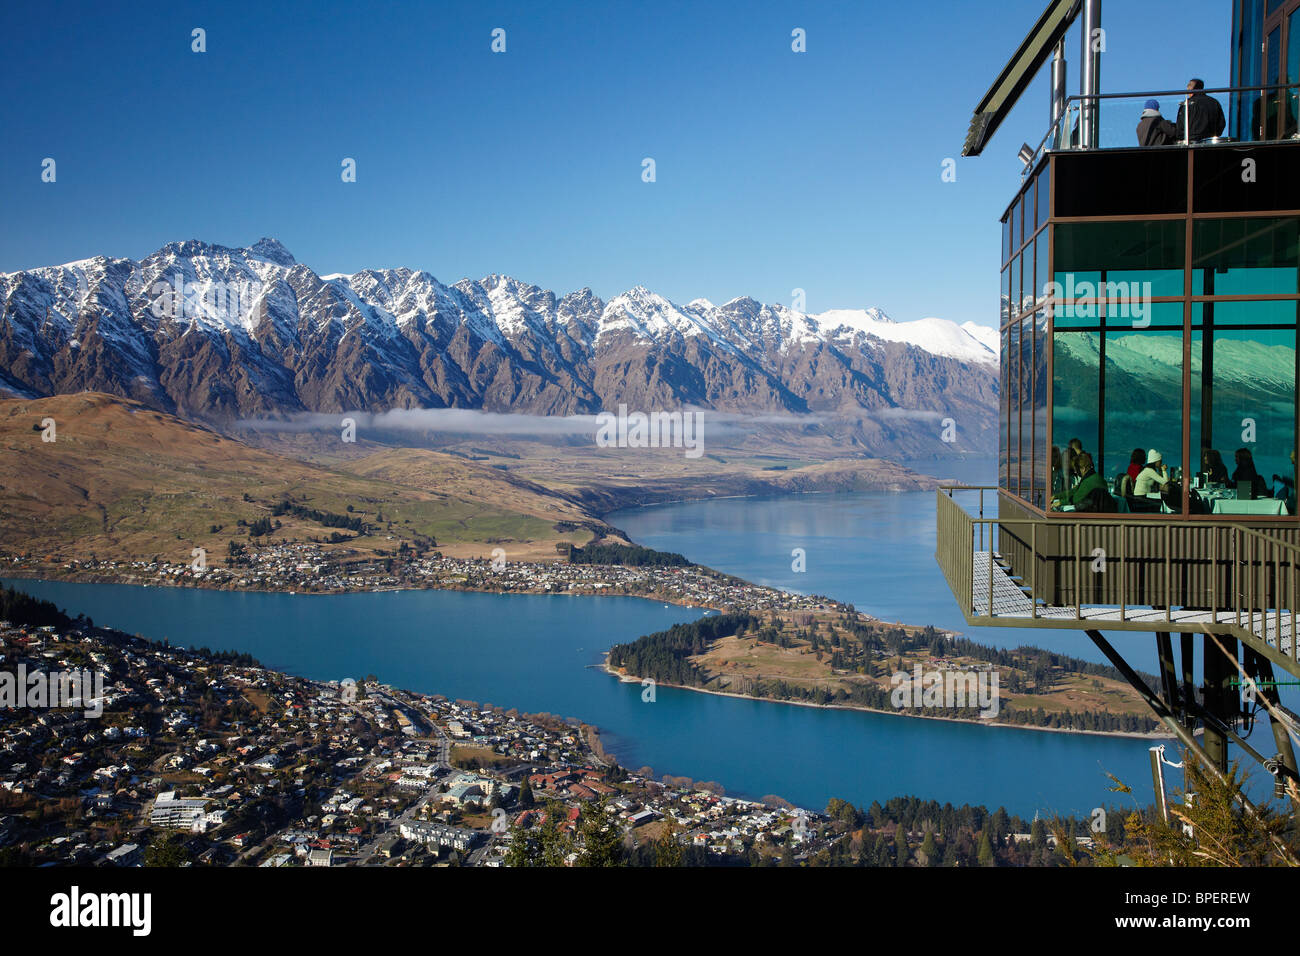 Skyline Restaurant, The Remarkables and Lake Wakatipu, Queenstown, South Island, New Zealand Stock Photo